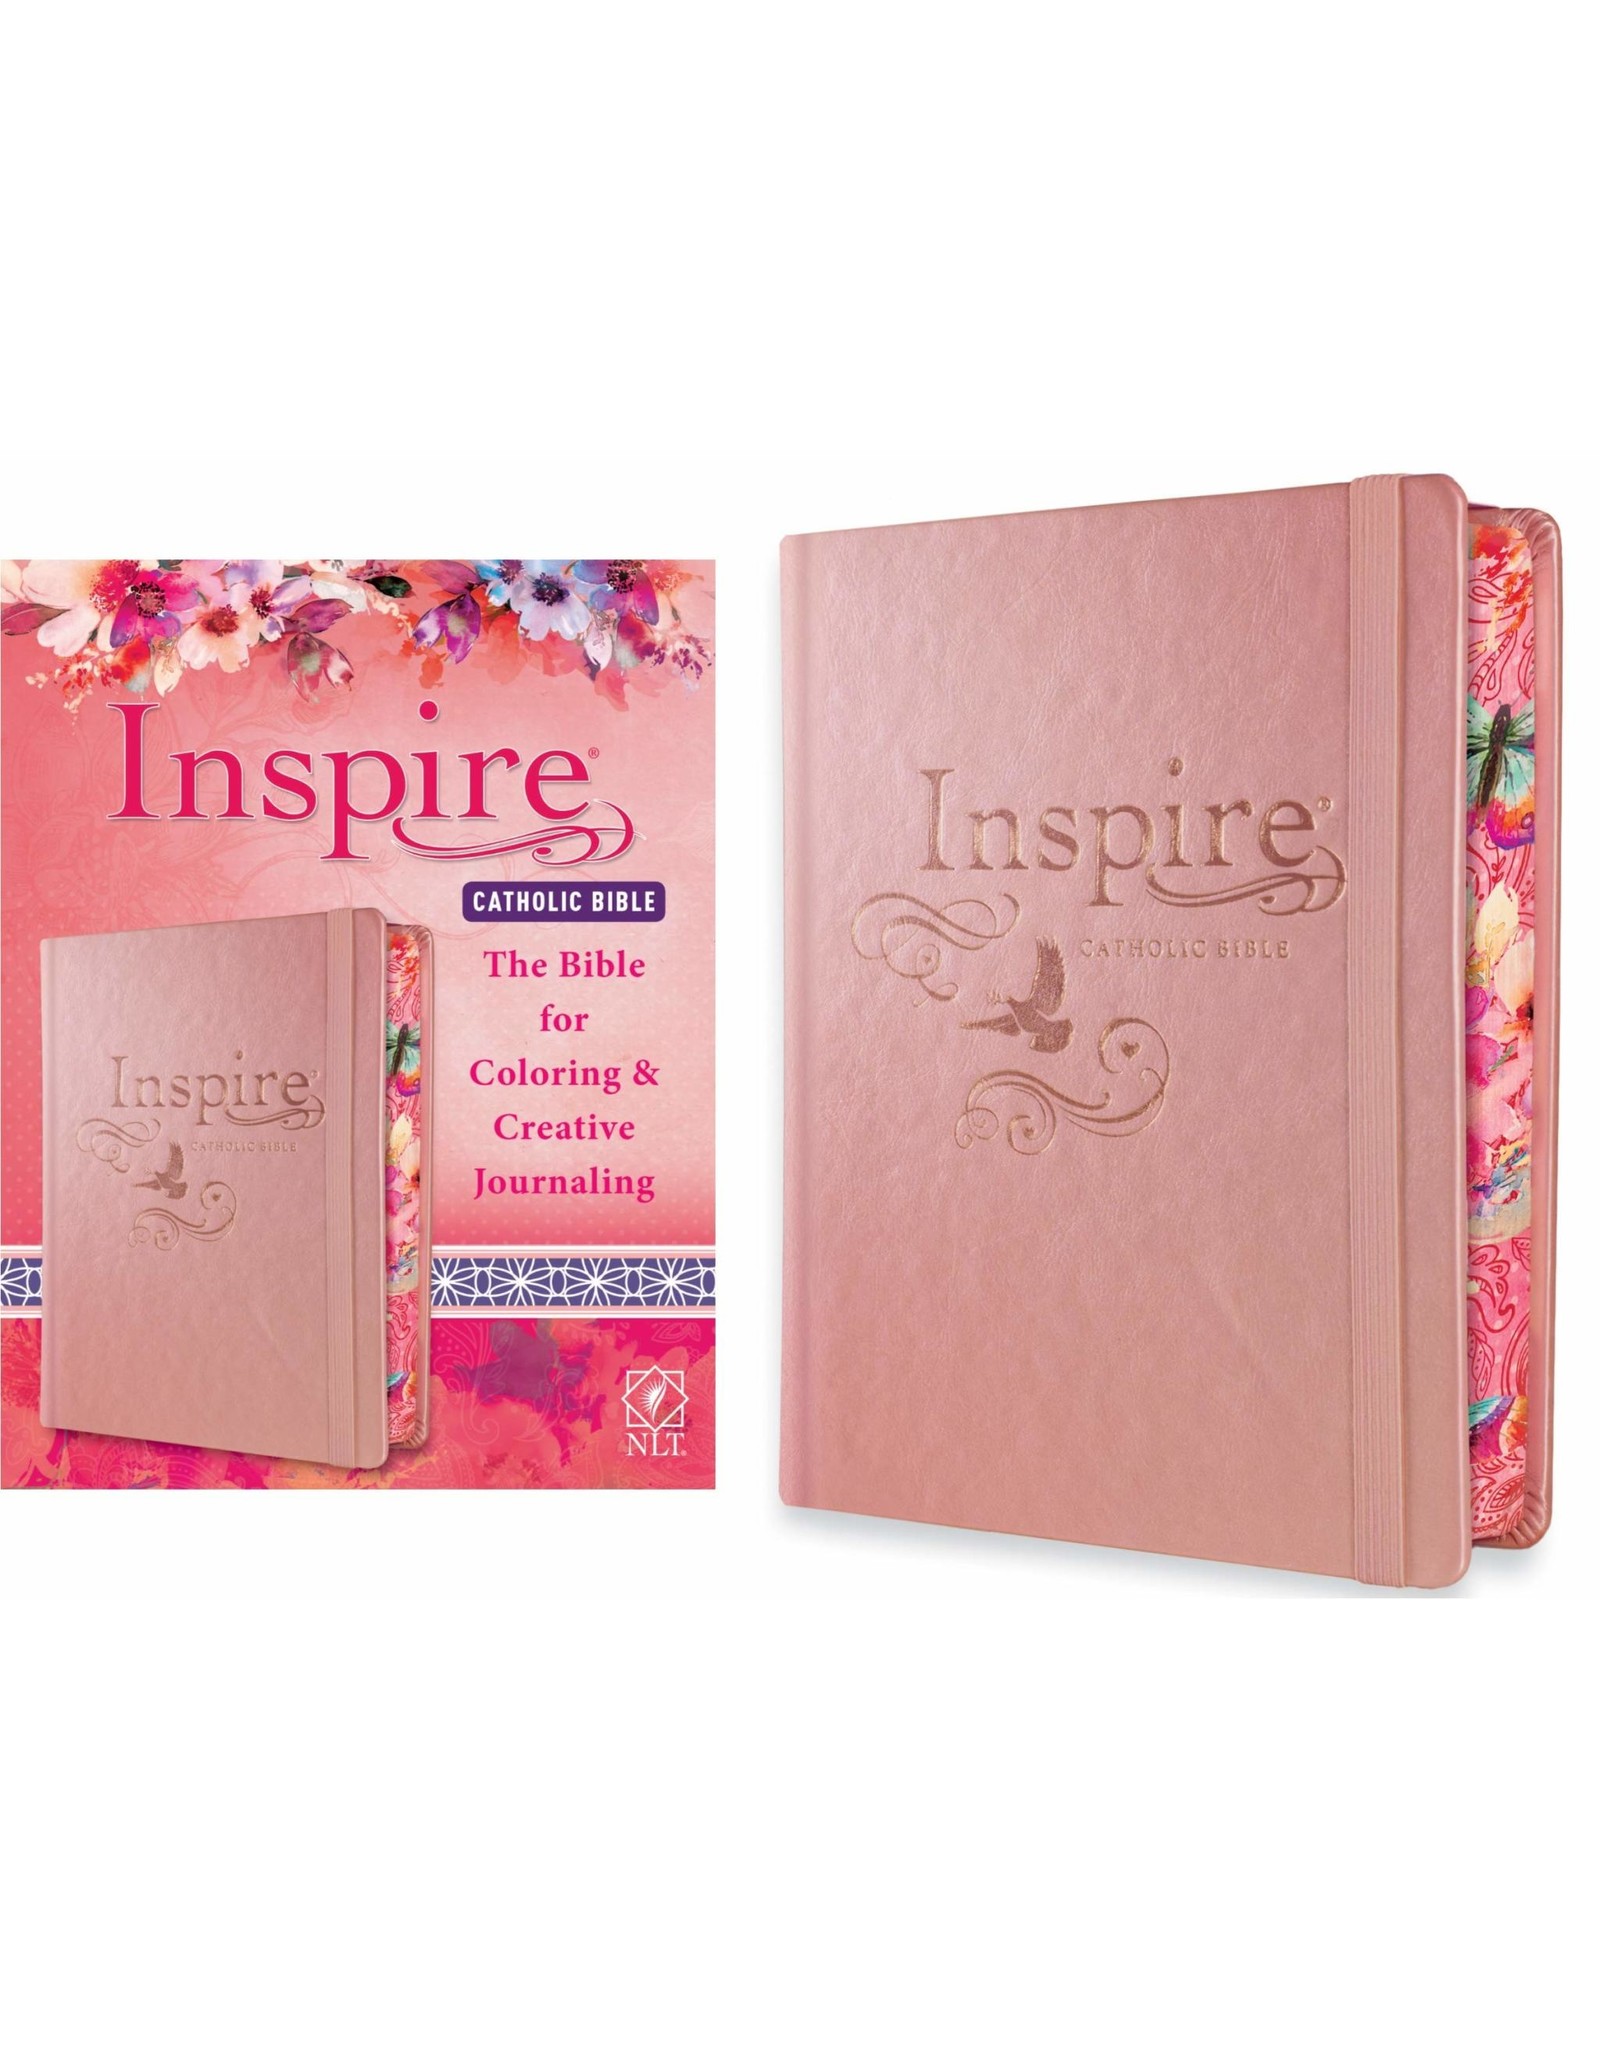 Tyndale Inspire Catholic Bible NLT: The Bible for Coloring & Creative Journaling